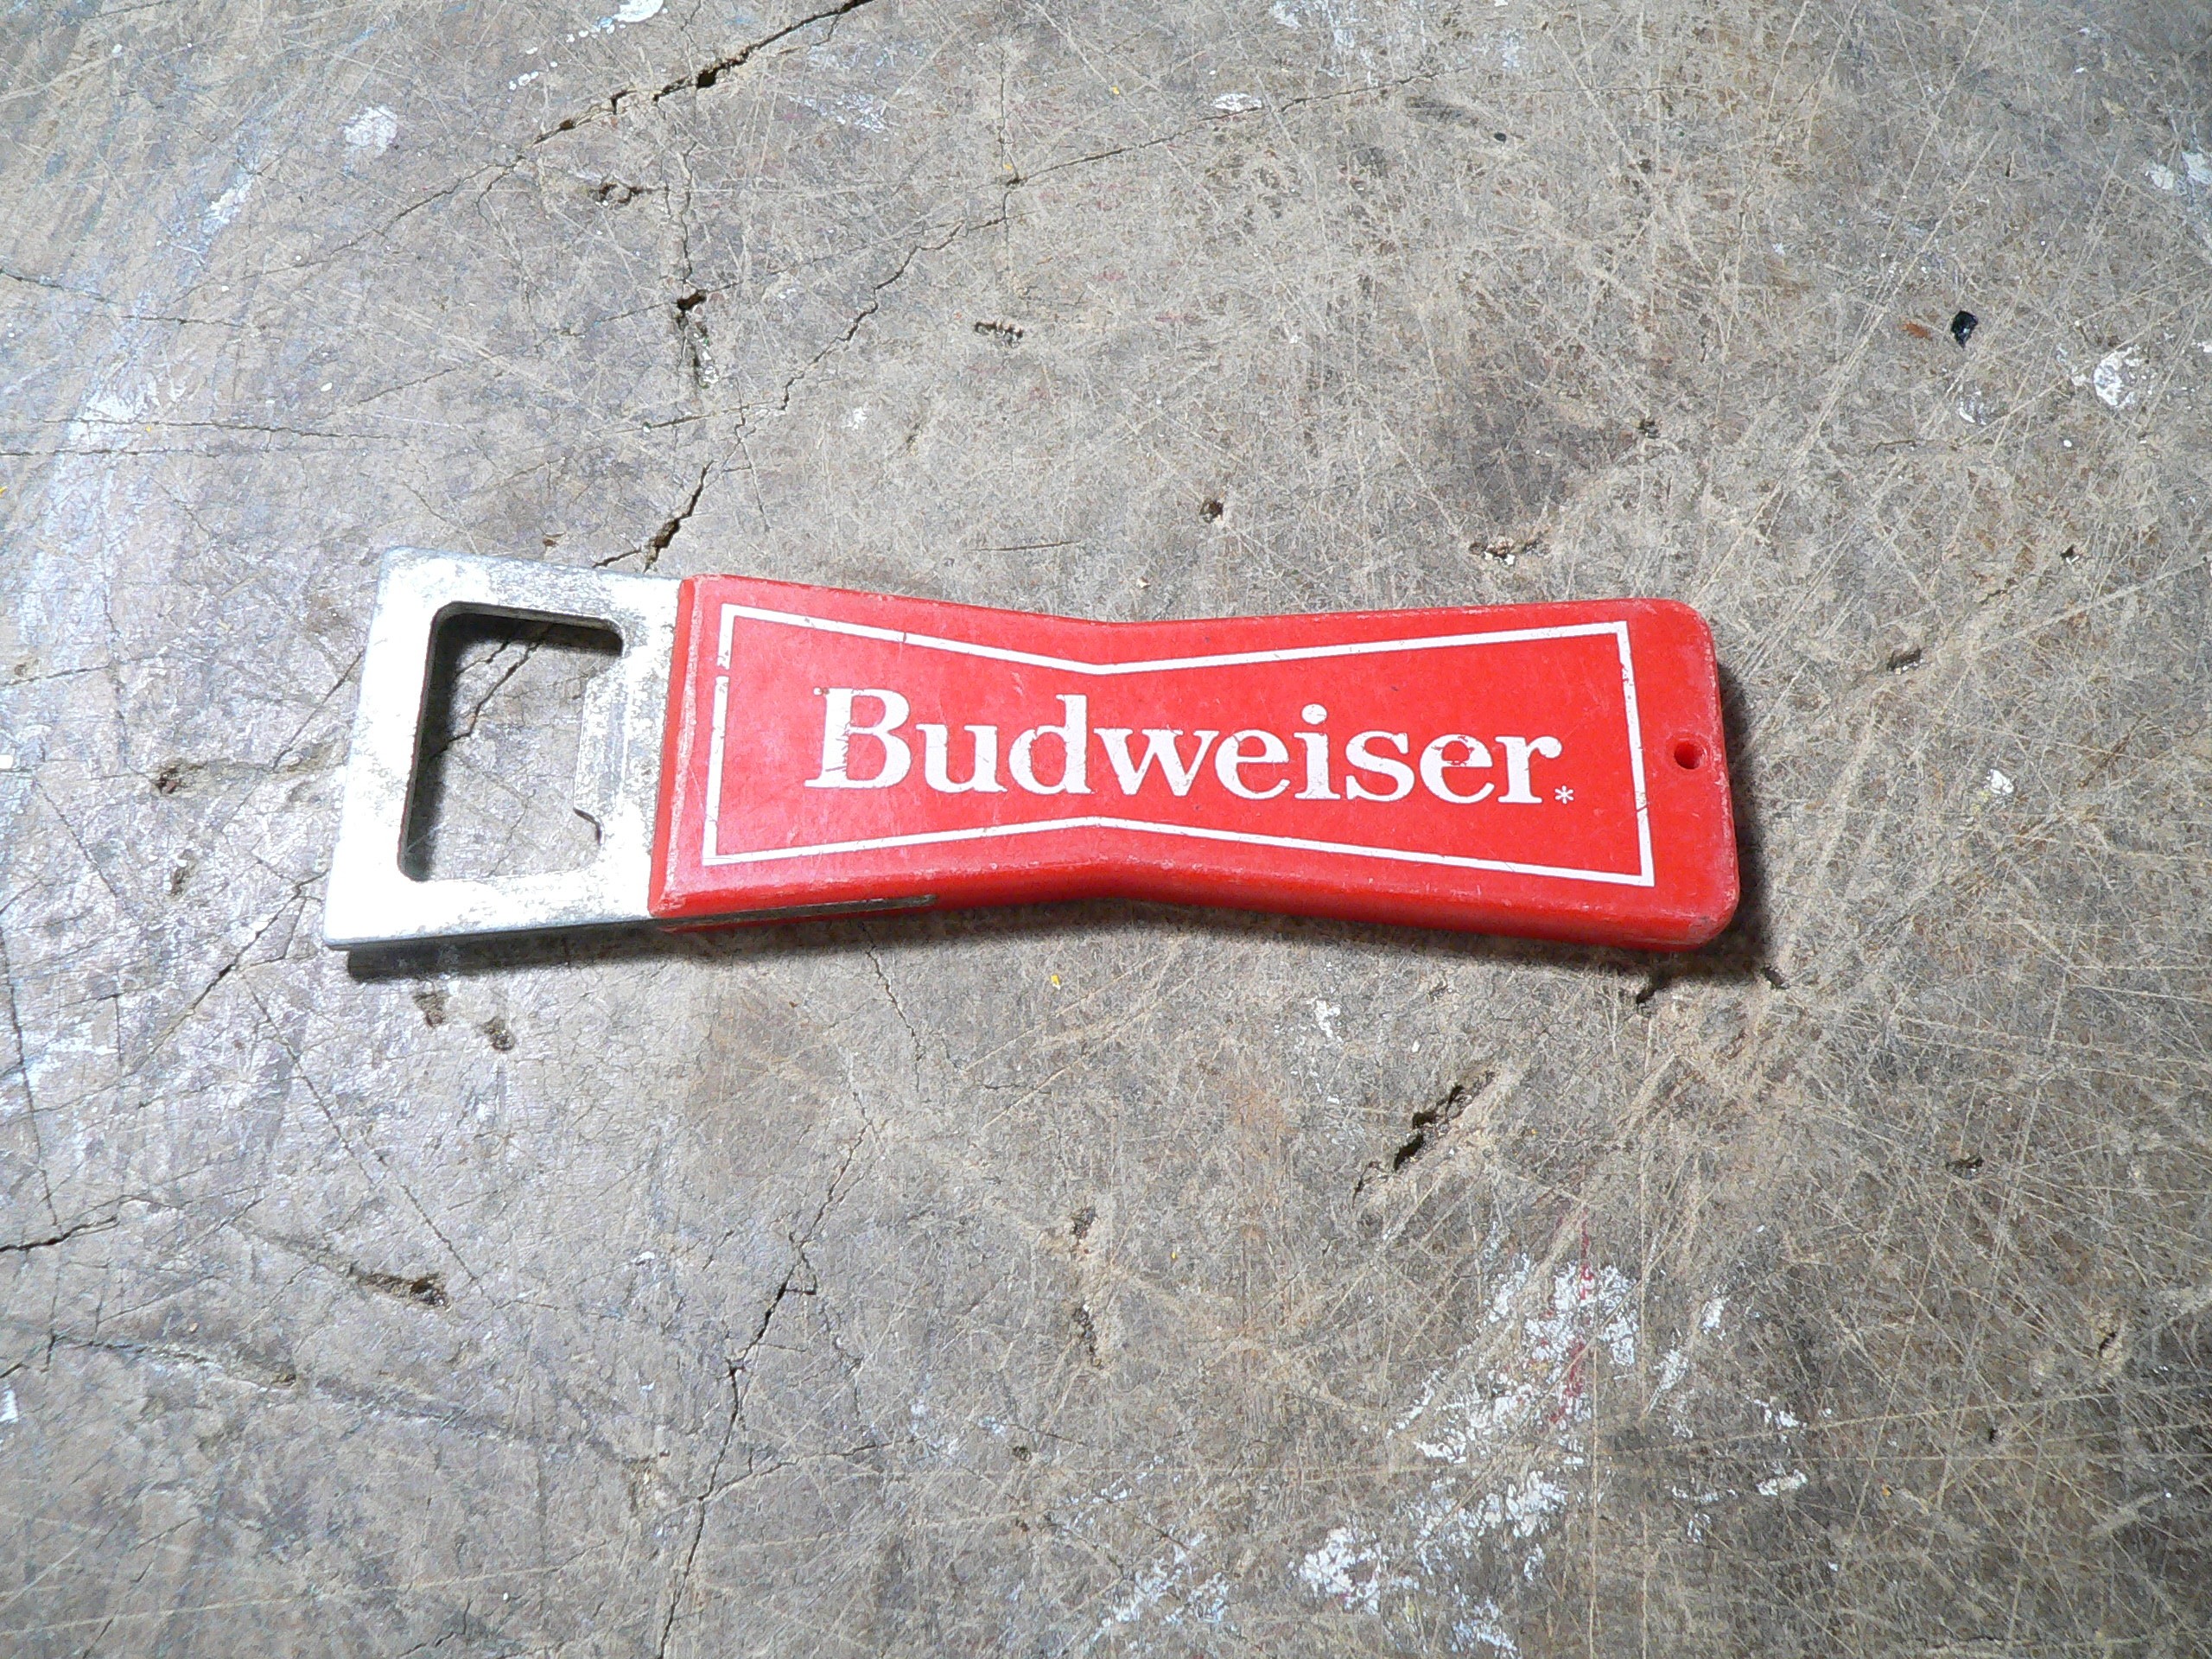 Ouvre bouteille budweiser # 8988